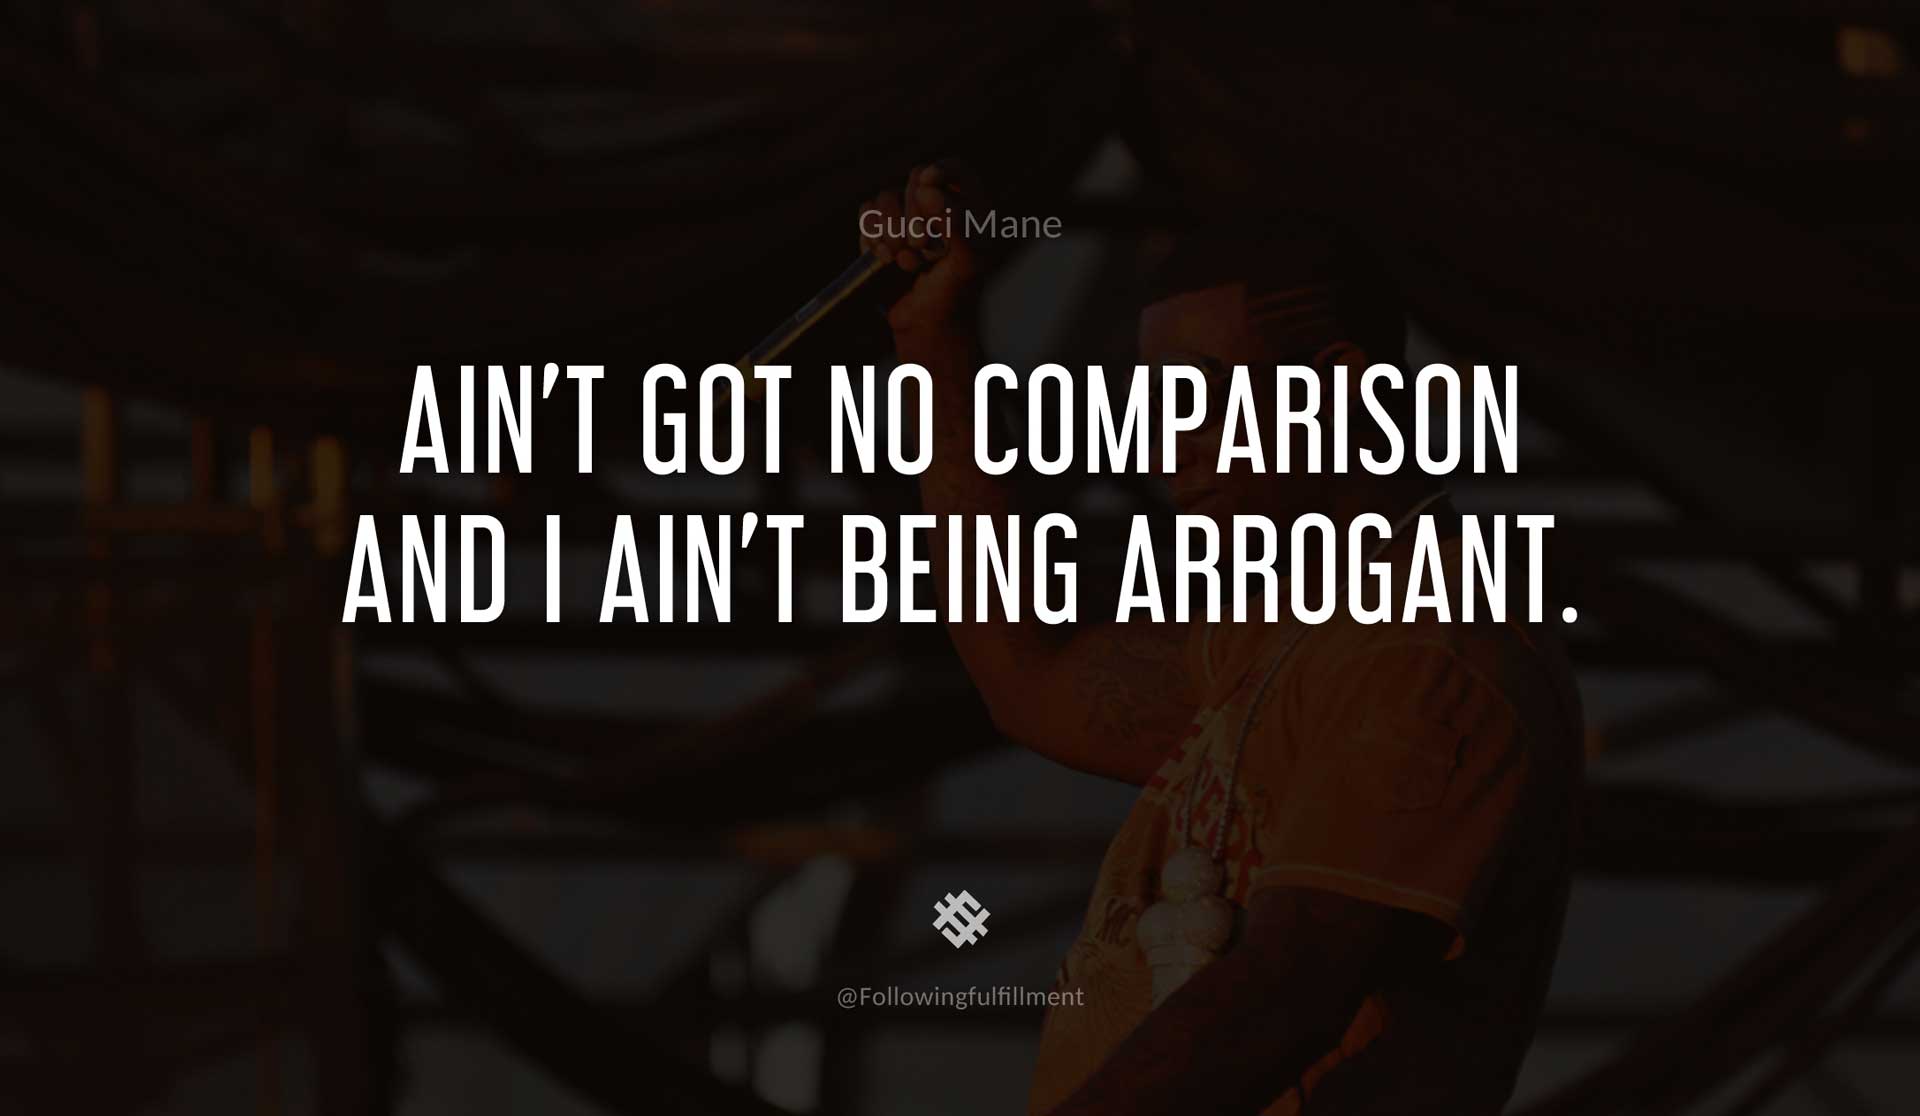 Ain't-got-no-comparison-and-I-ain't-being-arrogant.-GUCCI-MANE-Quote.jpg